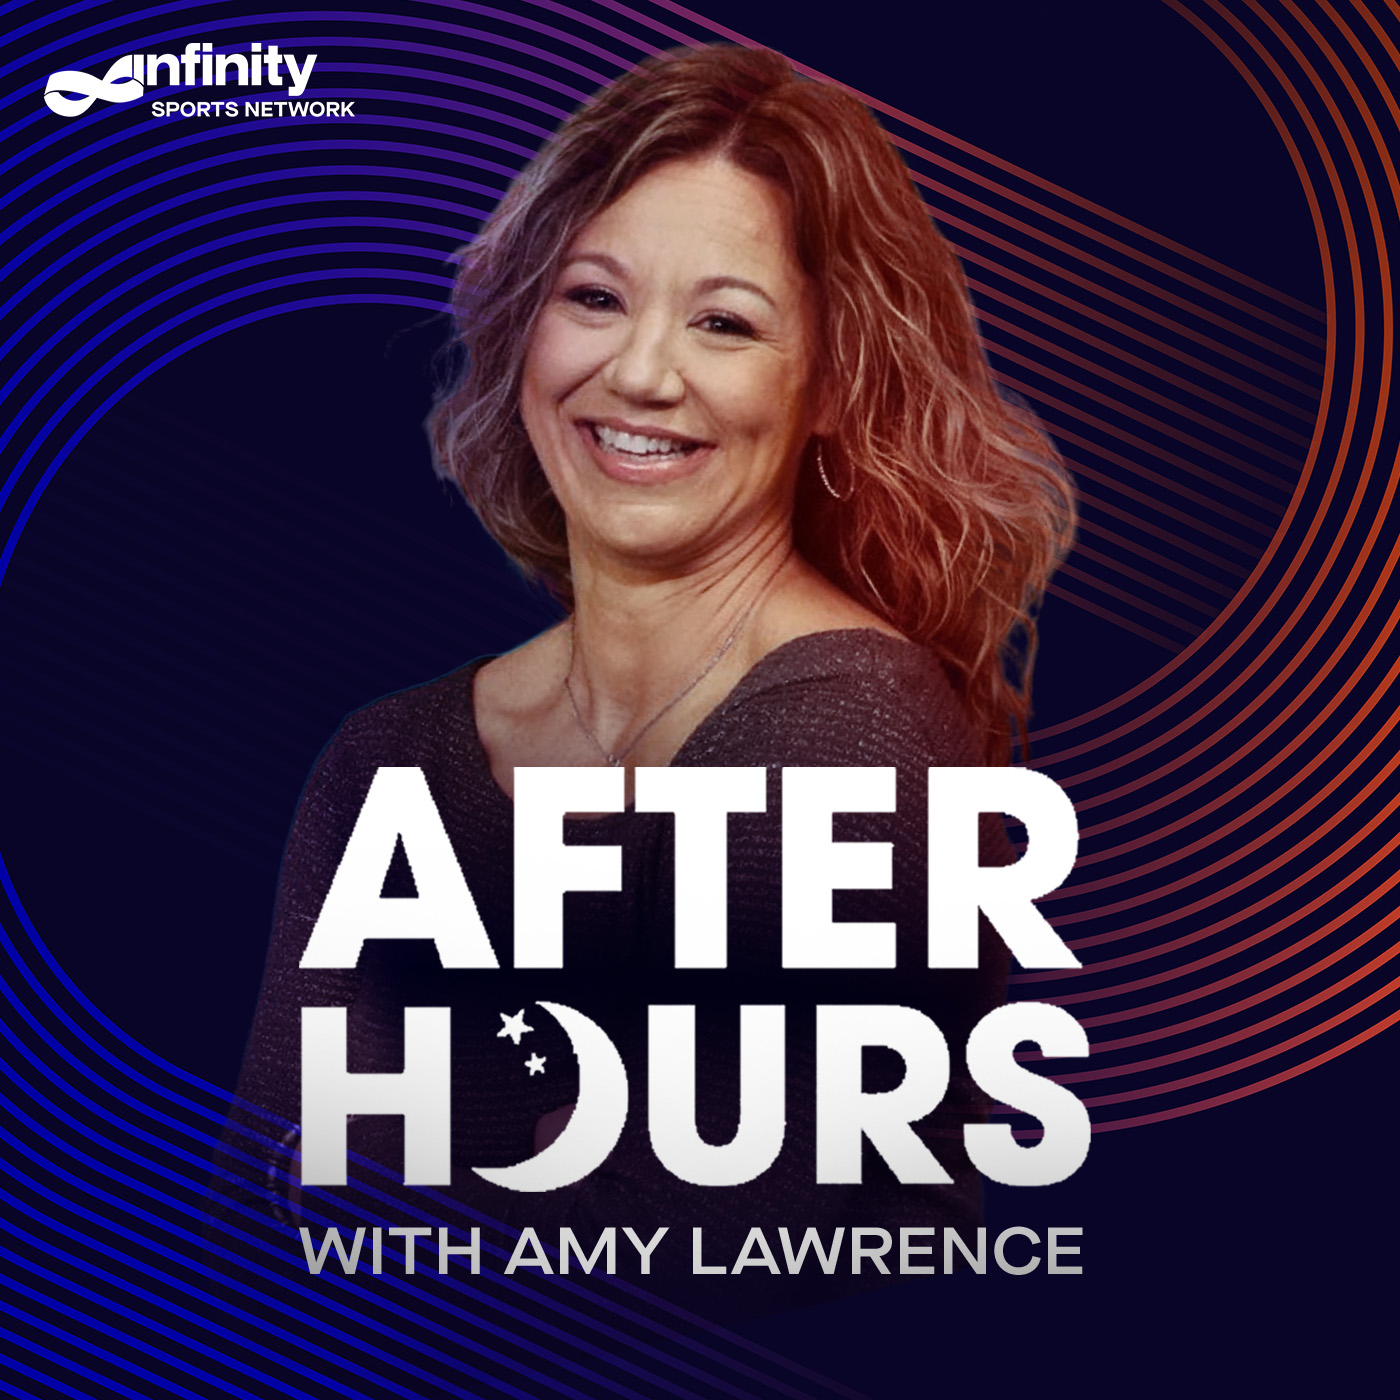 4-22-11 After Hours with Amy Lawrence PODCAST: Hour 2